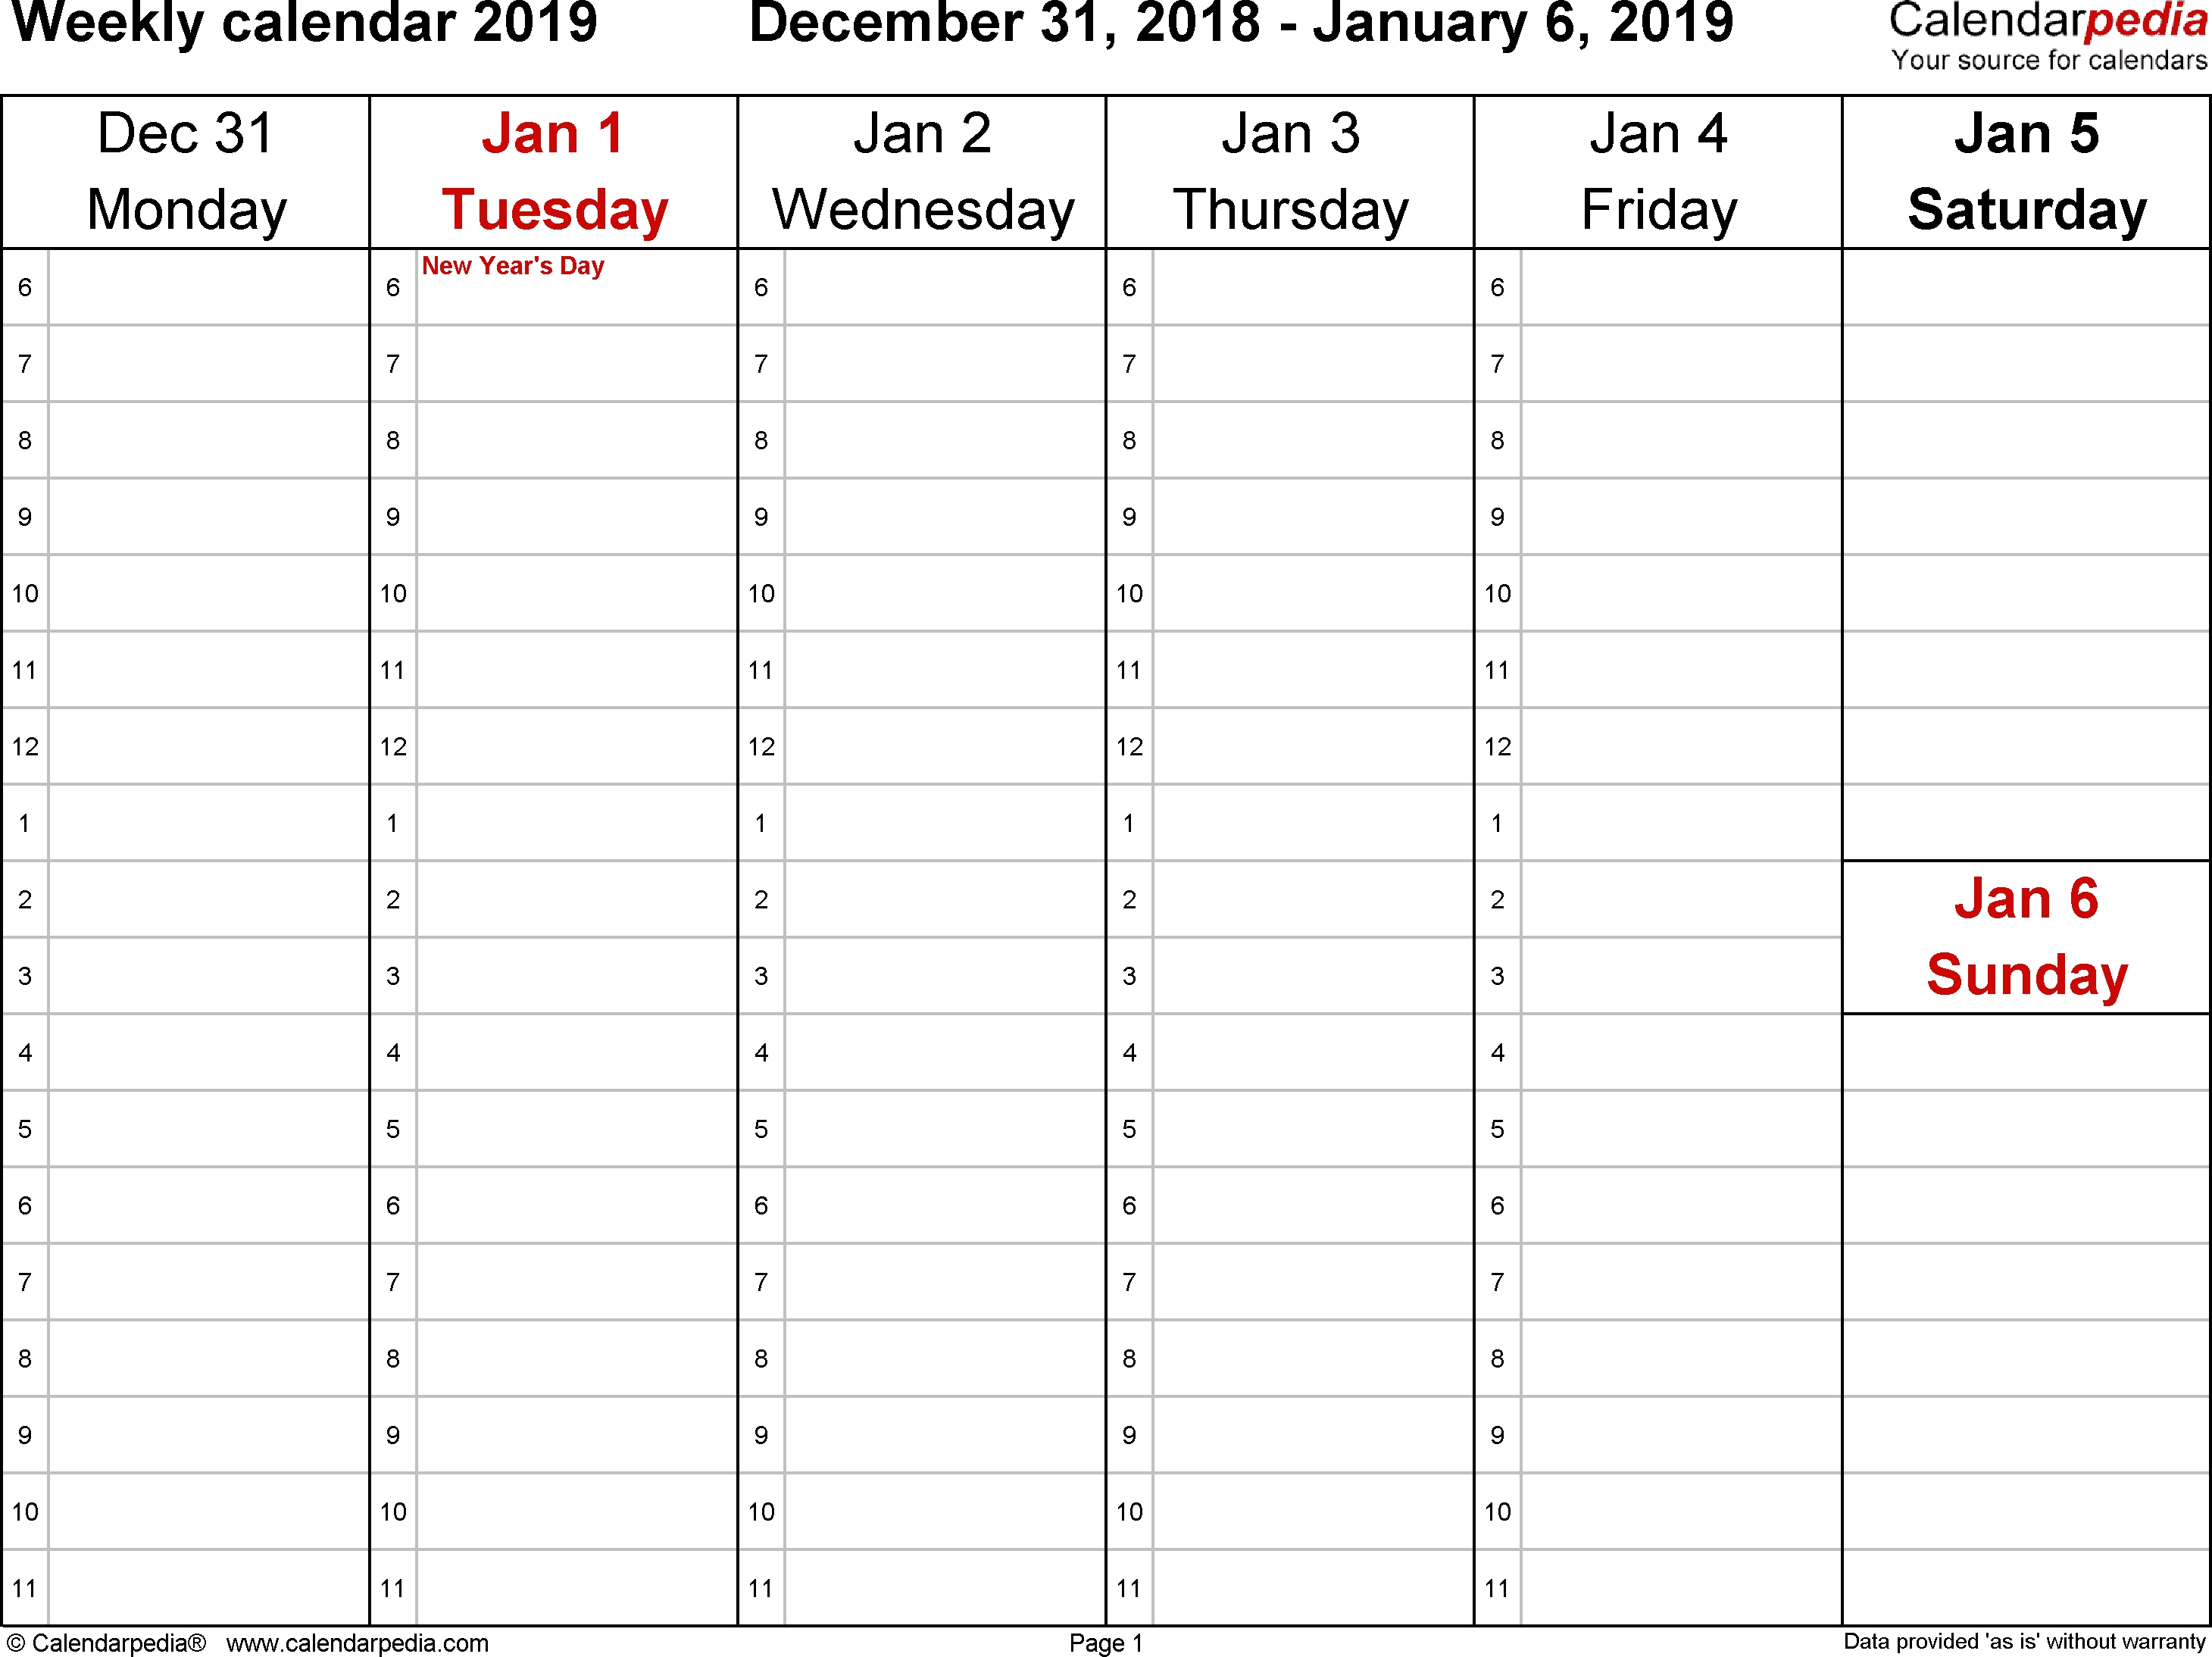 Weekly Calendar 2019 For Word - 12 Free Printable Templates pertaining to Fill In Blank Weekly Calendar Templates